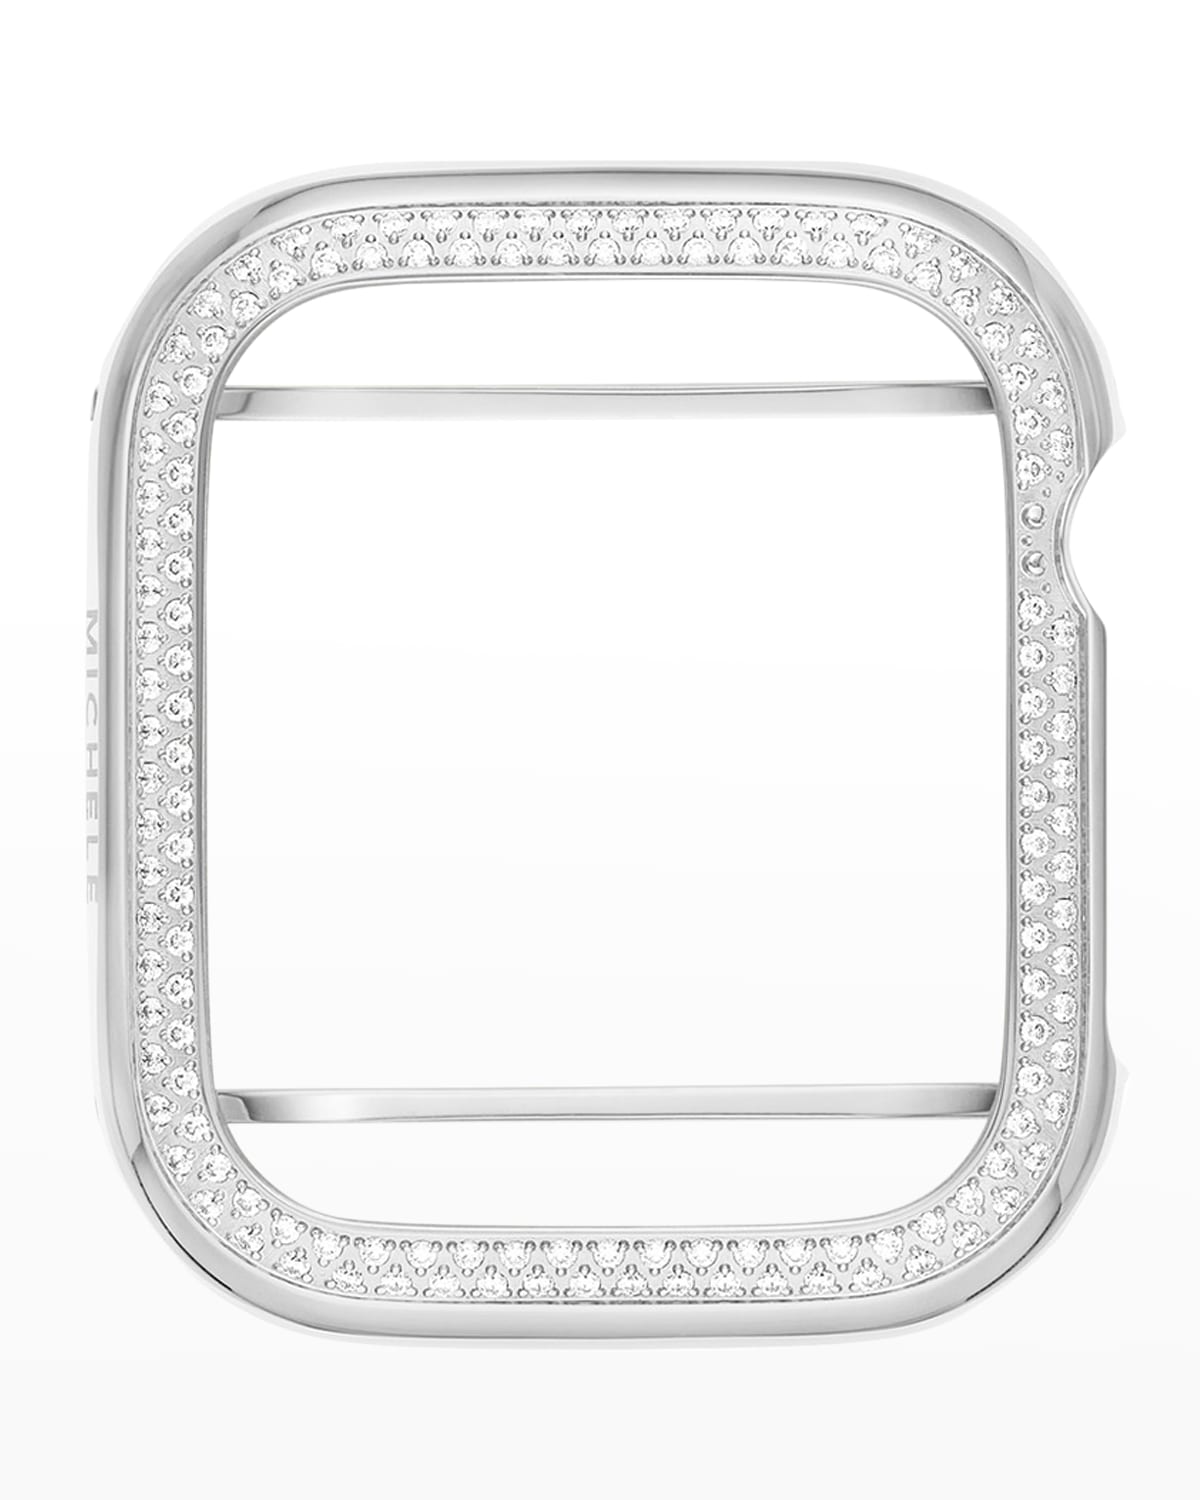 Diamond Jacket for Apple Watch in Stainless Steel, 40mm